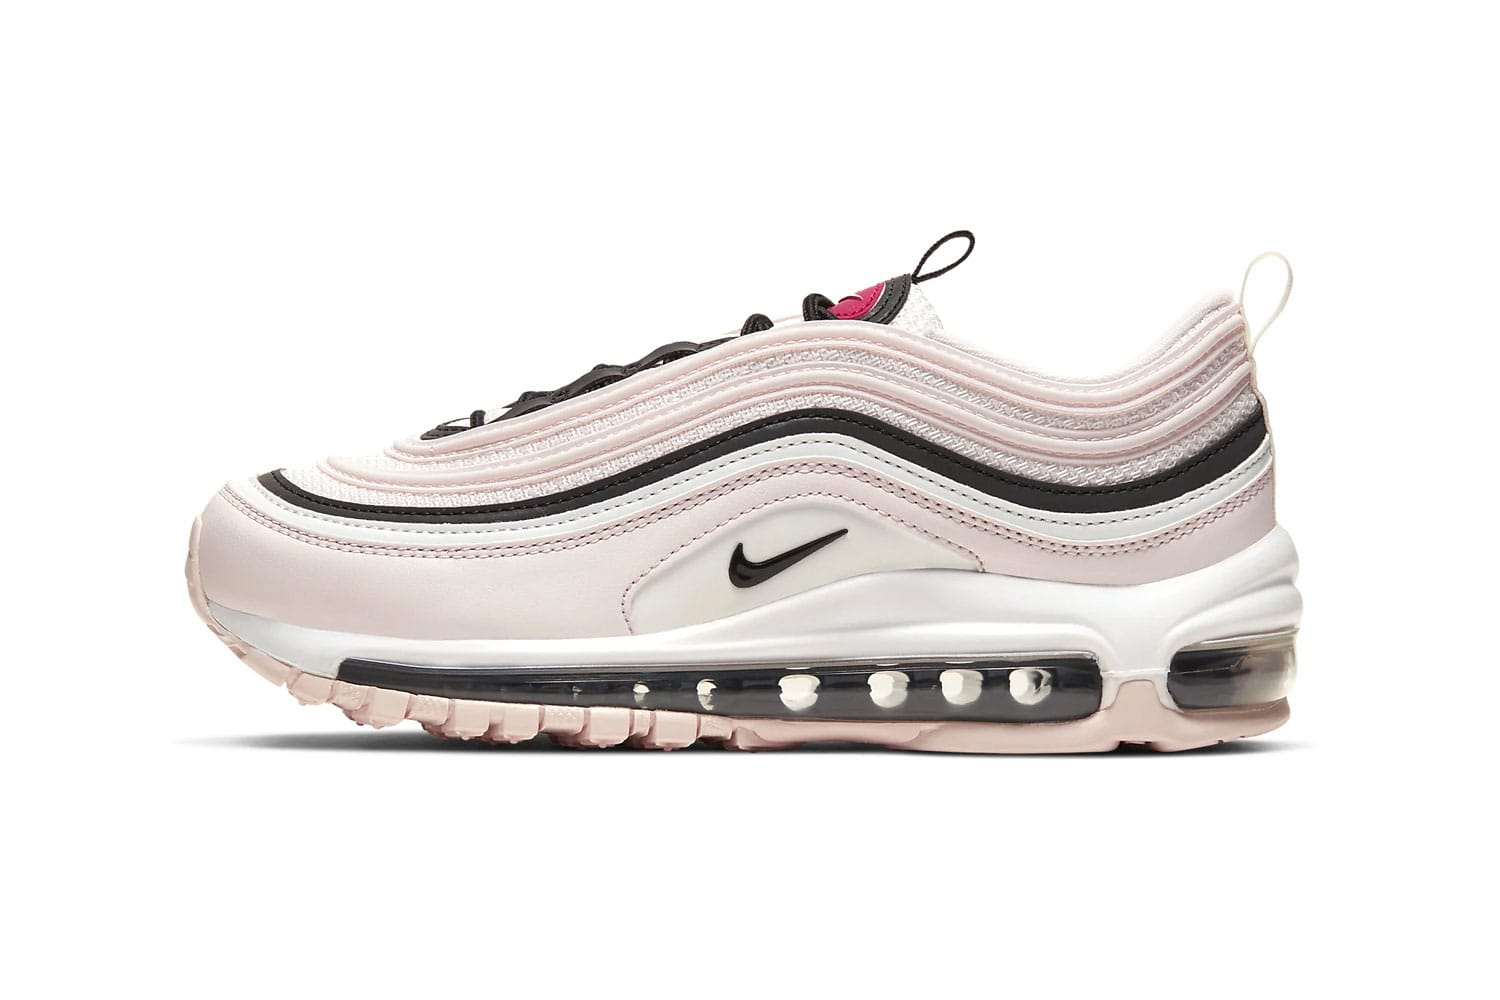 Air Max 97 Arrives in Cotton Candy Pink 